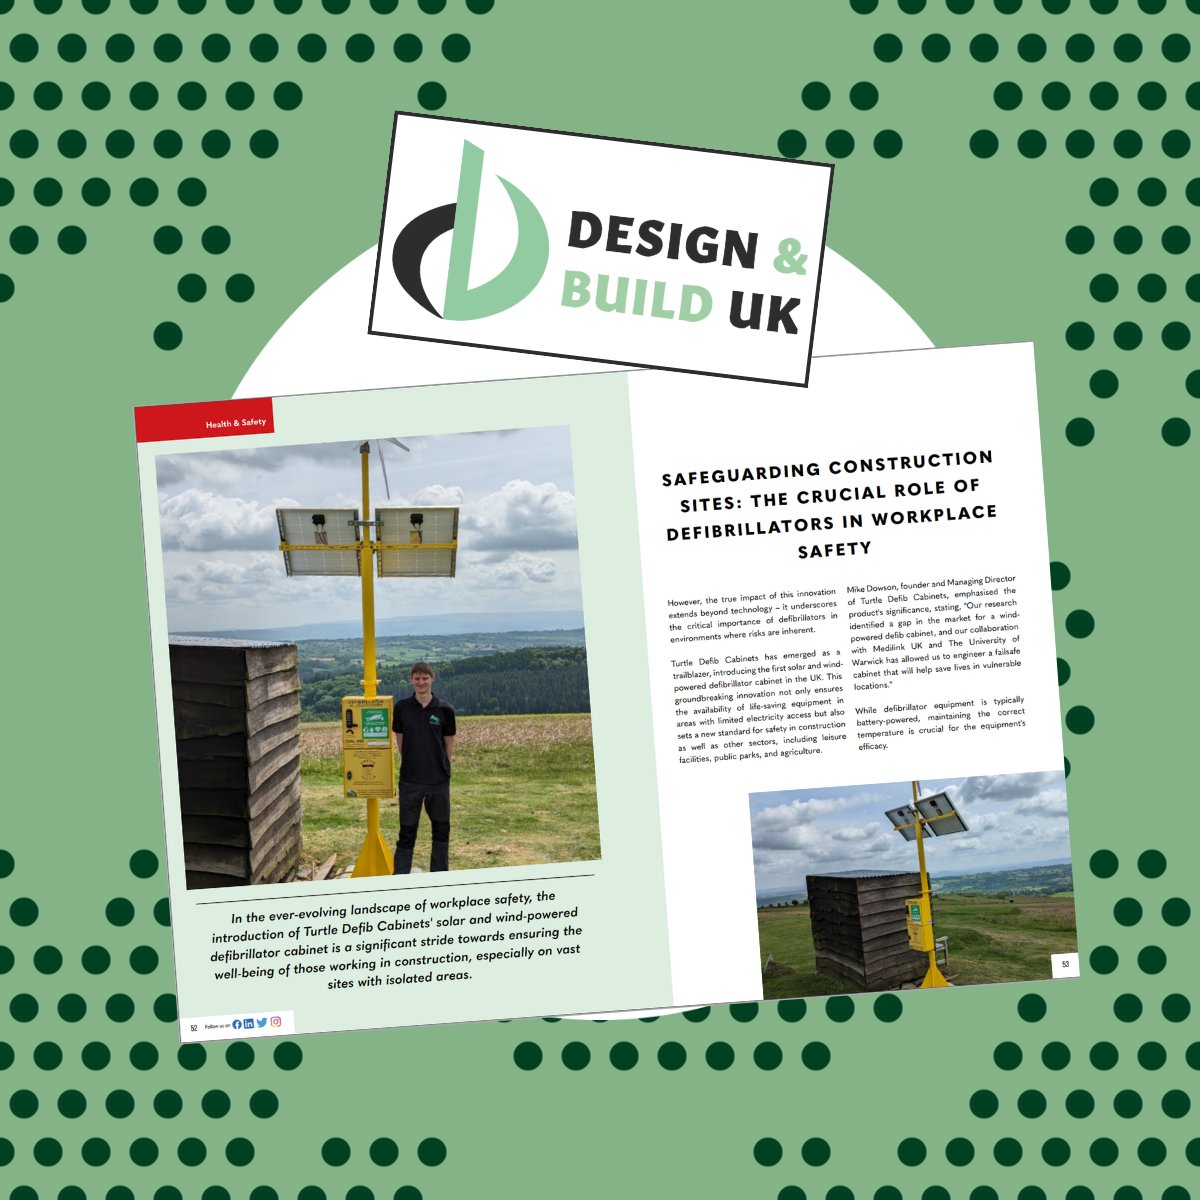 Thanks Design & Build UK mag for covering the crucial role of #defibs & the benefits of our #solar & #windpower #defibcabinet on vast #construction sites. #HealthandSafety & #sustainability: #Highways #Rail #LogisticPark #Freeports #Docks #Bridges #NSIP #Civils #Infrastructure